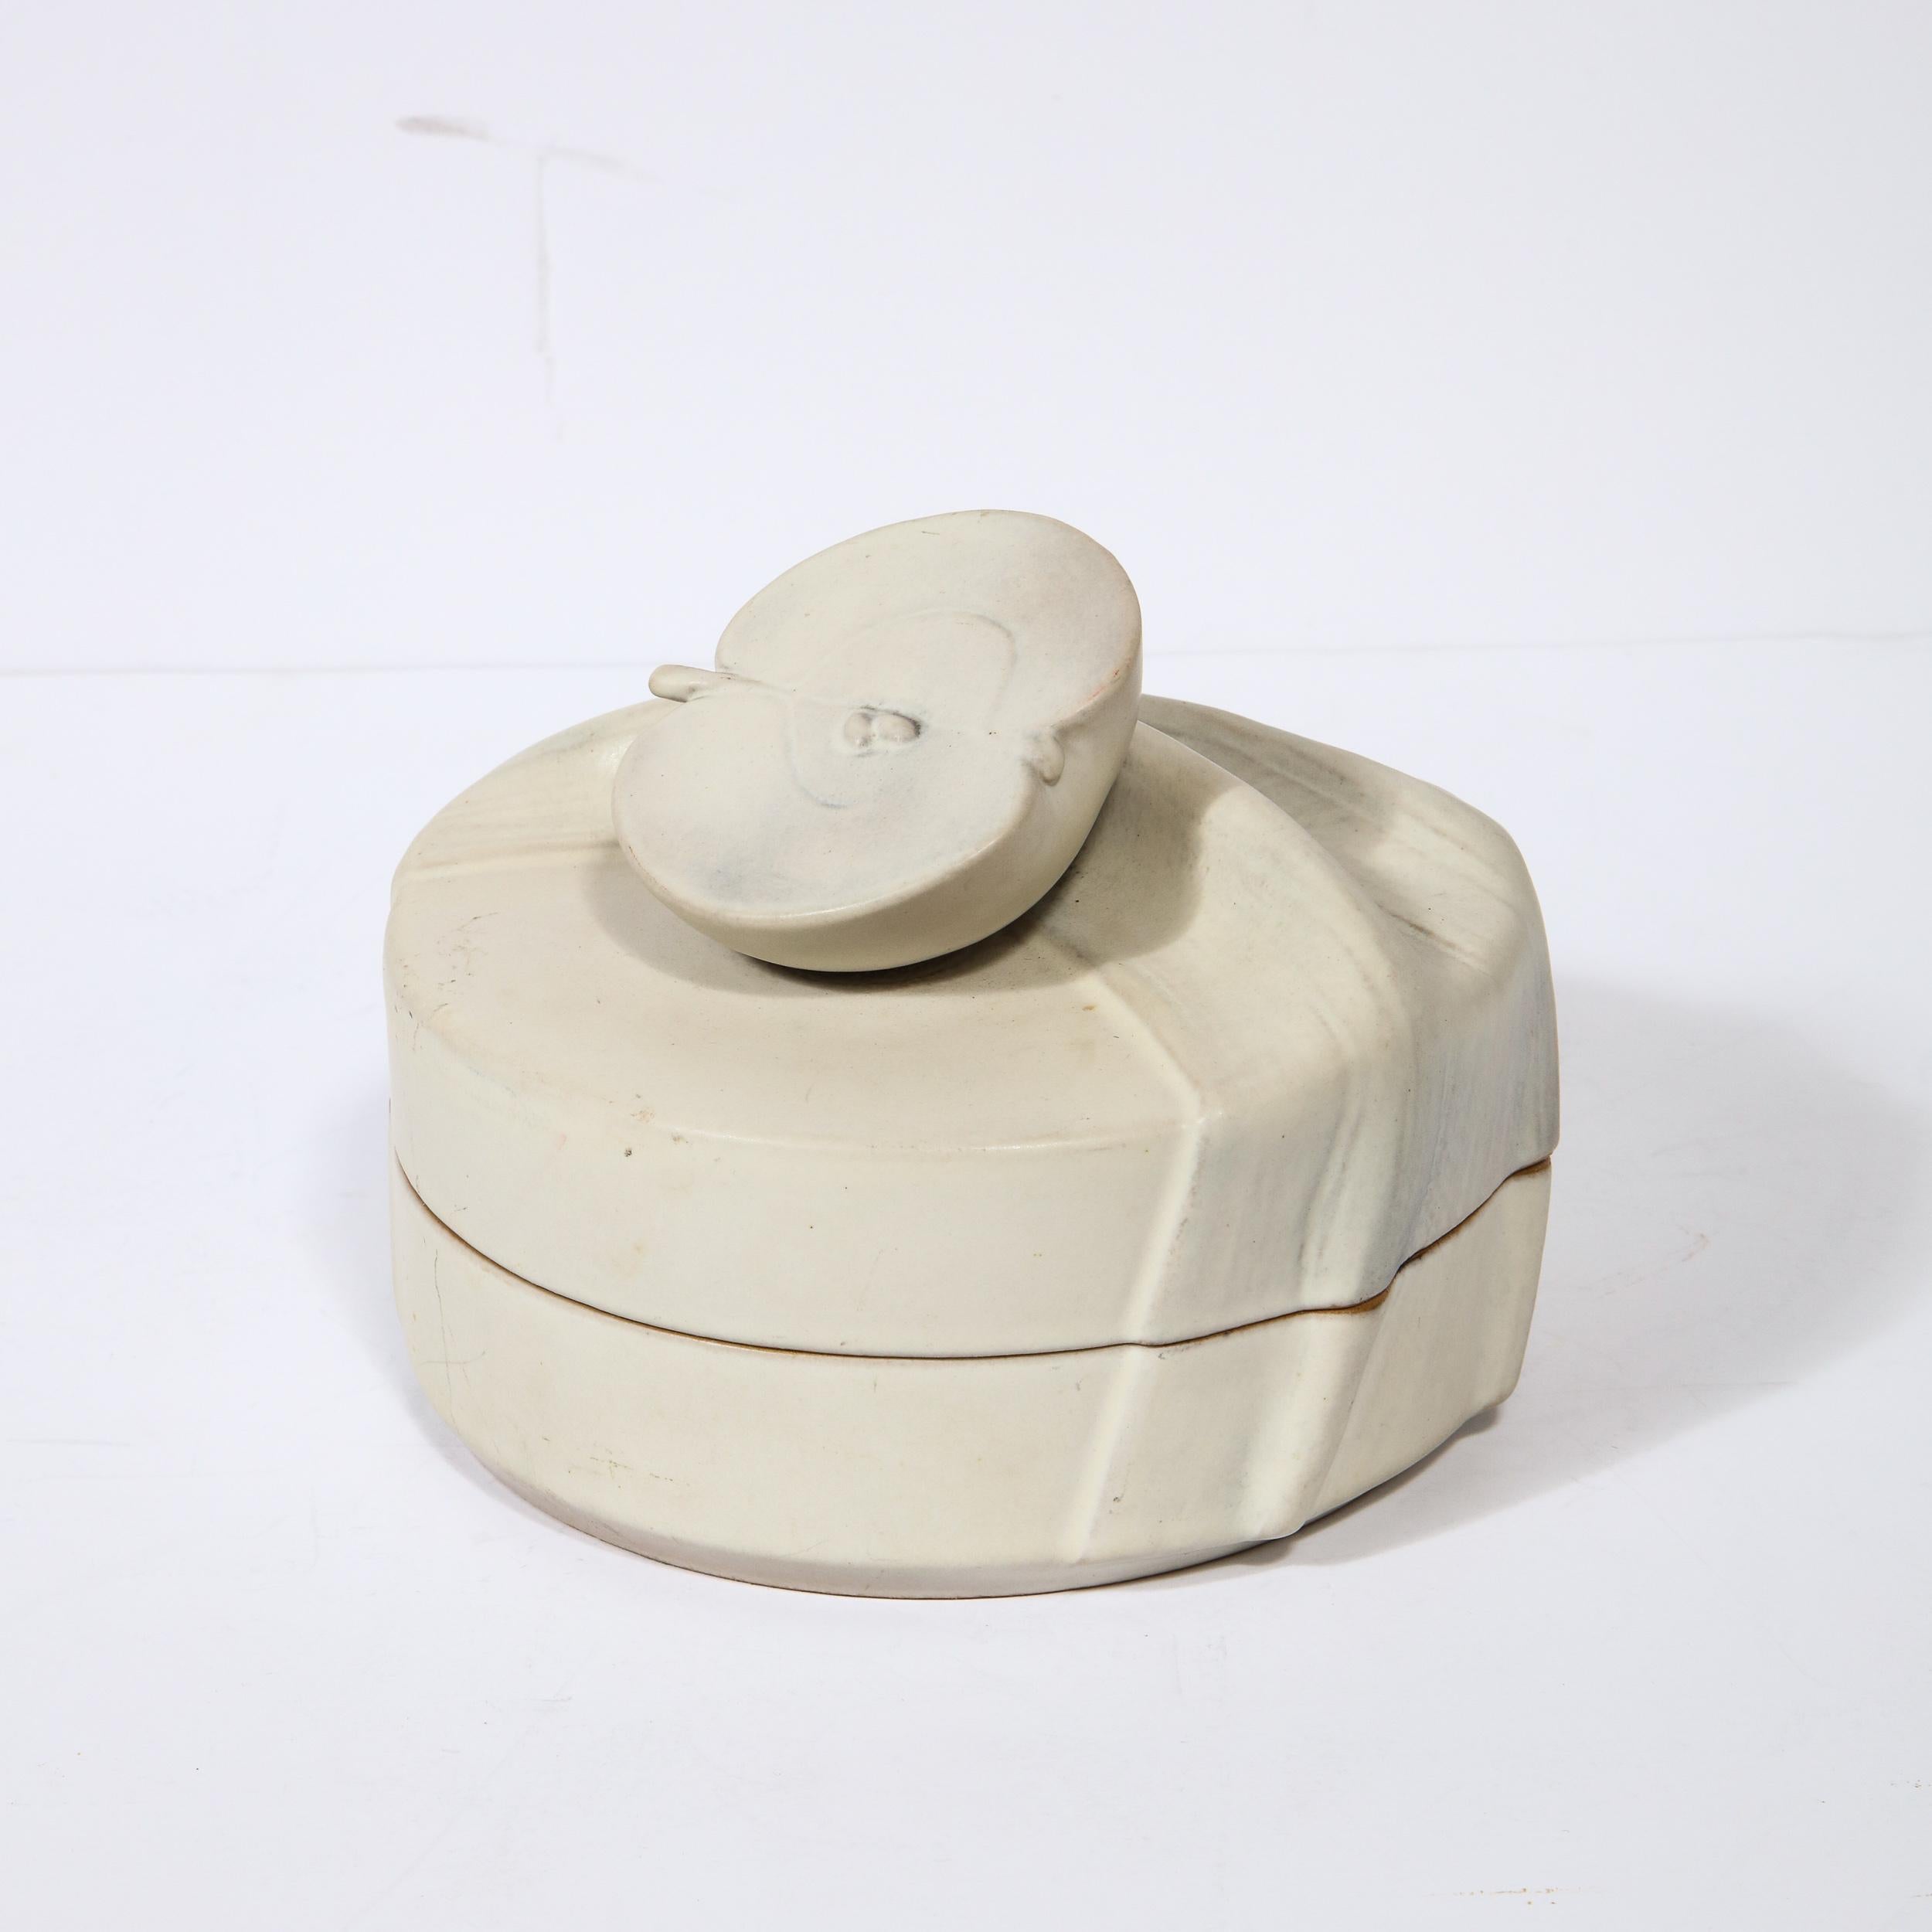 This sophisticated ceramic lidded box was realized by the esteemed maker Rosenthal. It features a round body with a sculptural pull in the form of a halved apple sitting on a textural surface that looks like pulled fabric (a gathered table cloth per